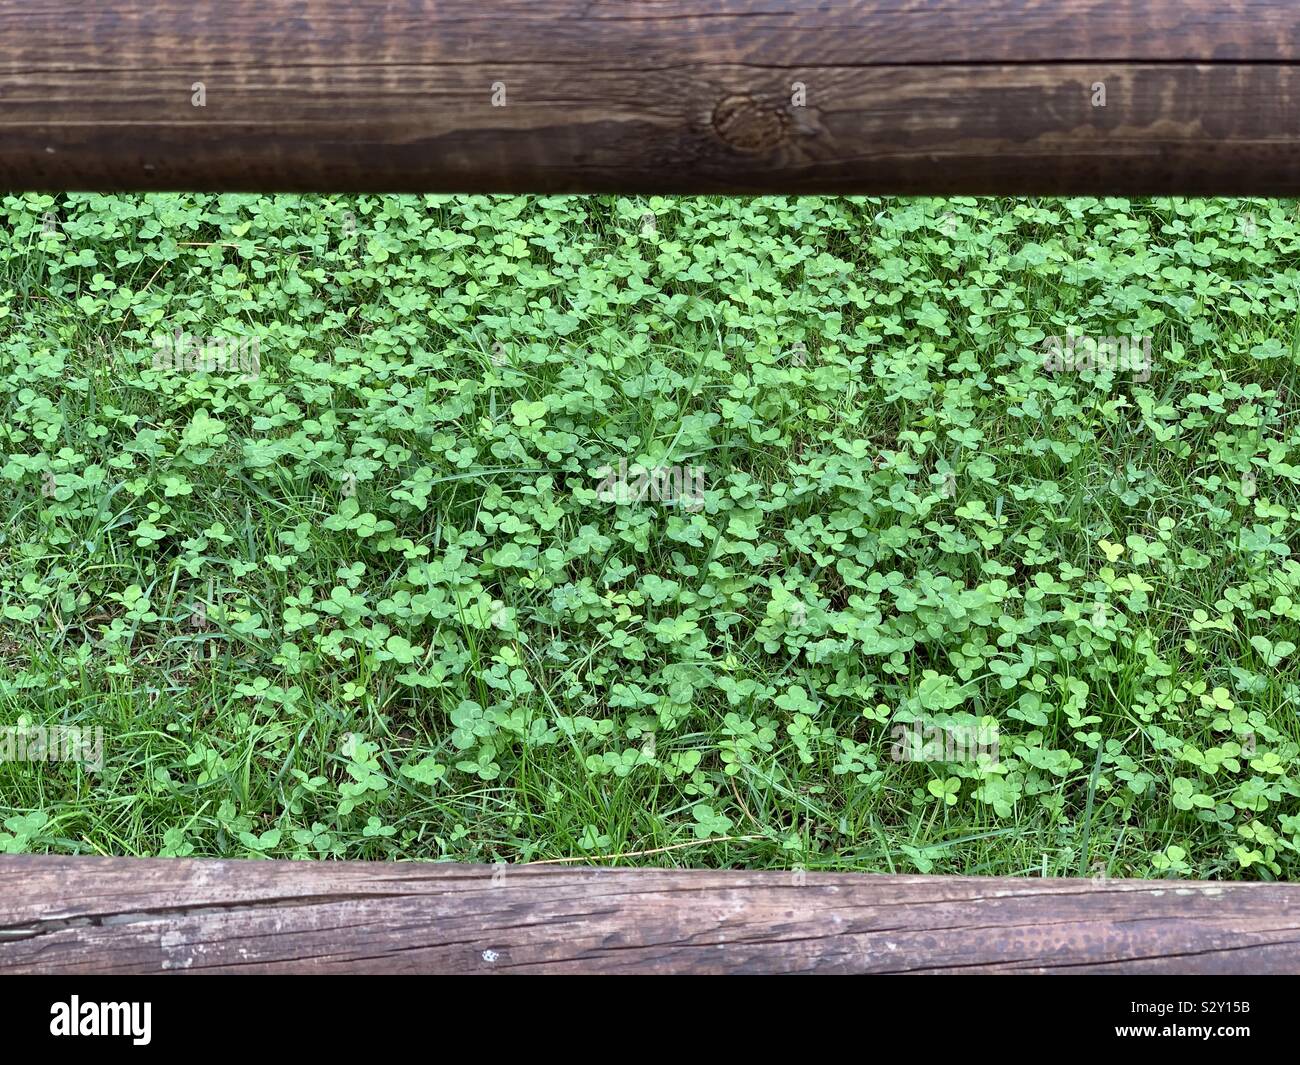 Grass lawn of clovers portrait Stock Photo